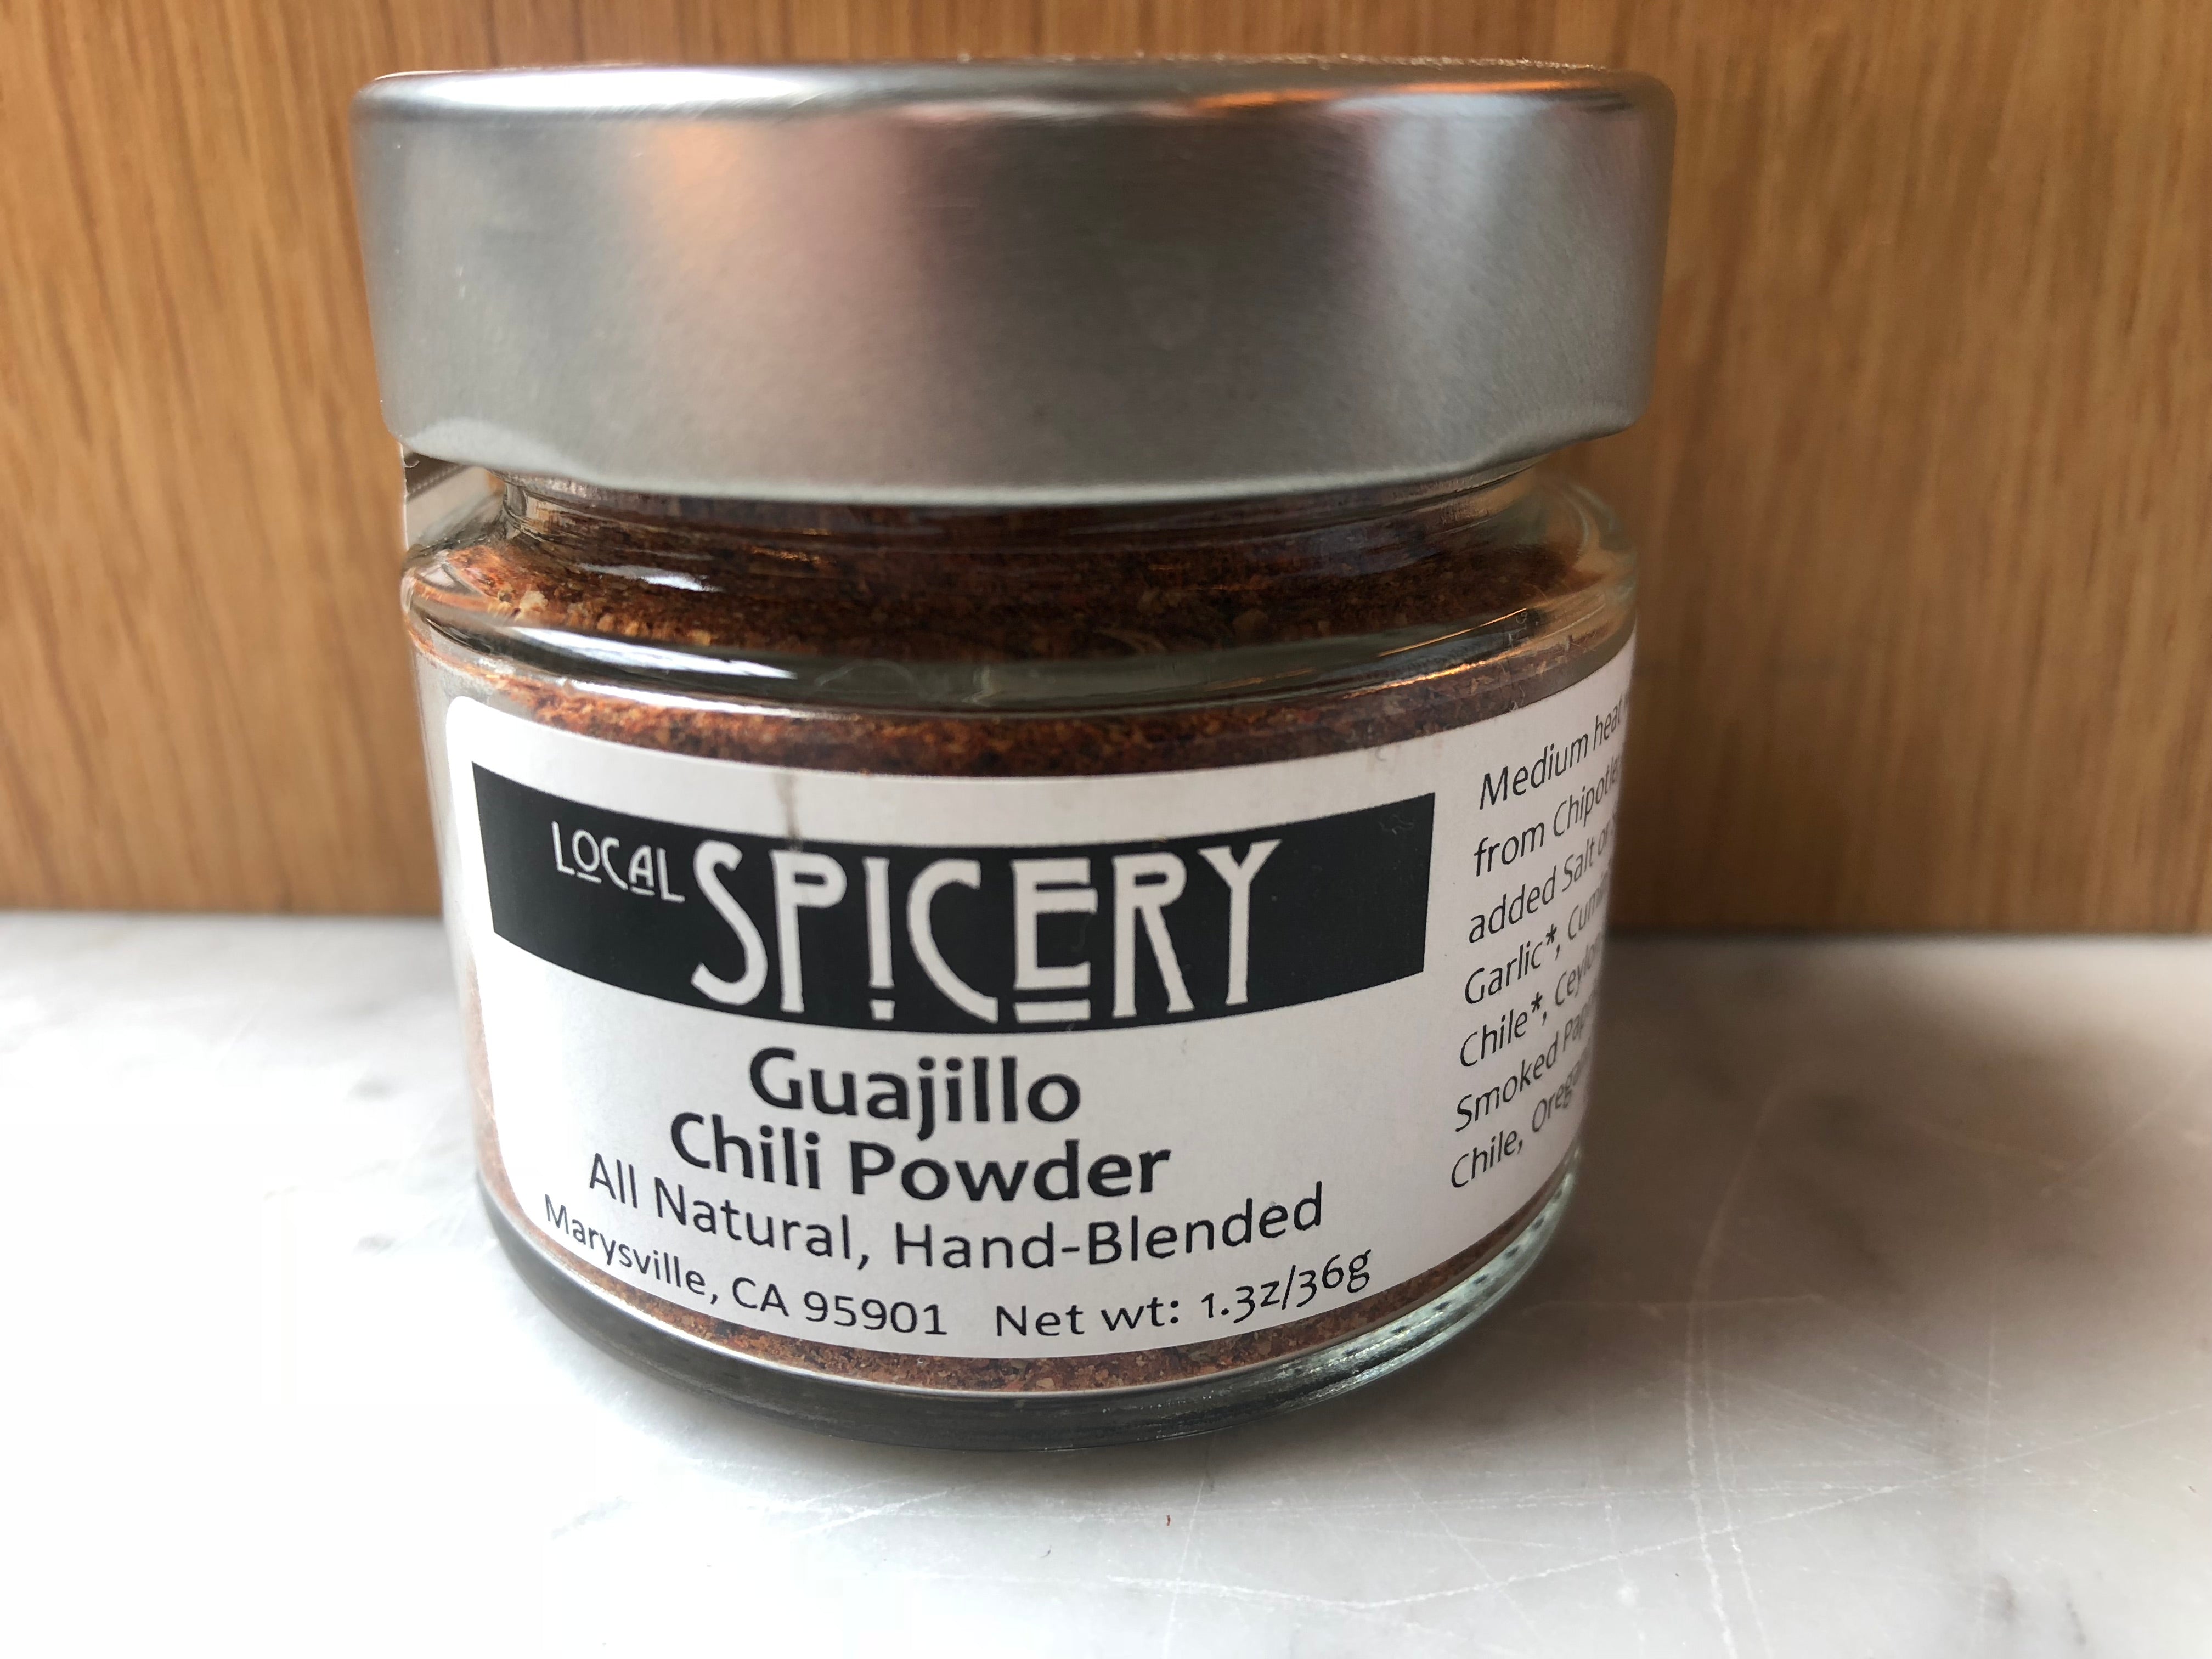 Local Spicery, Guajillo Chile Powder, All Natural, Hand Blended